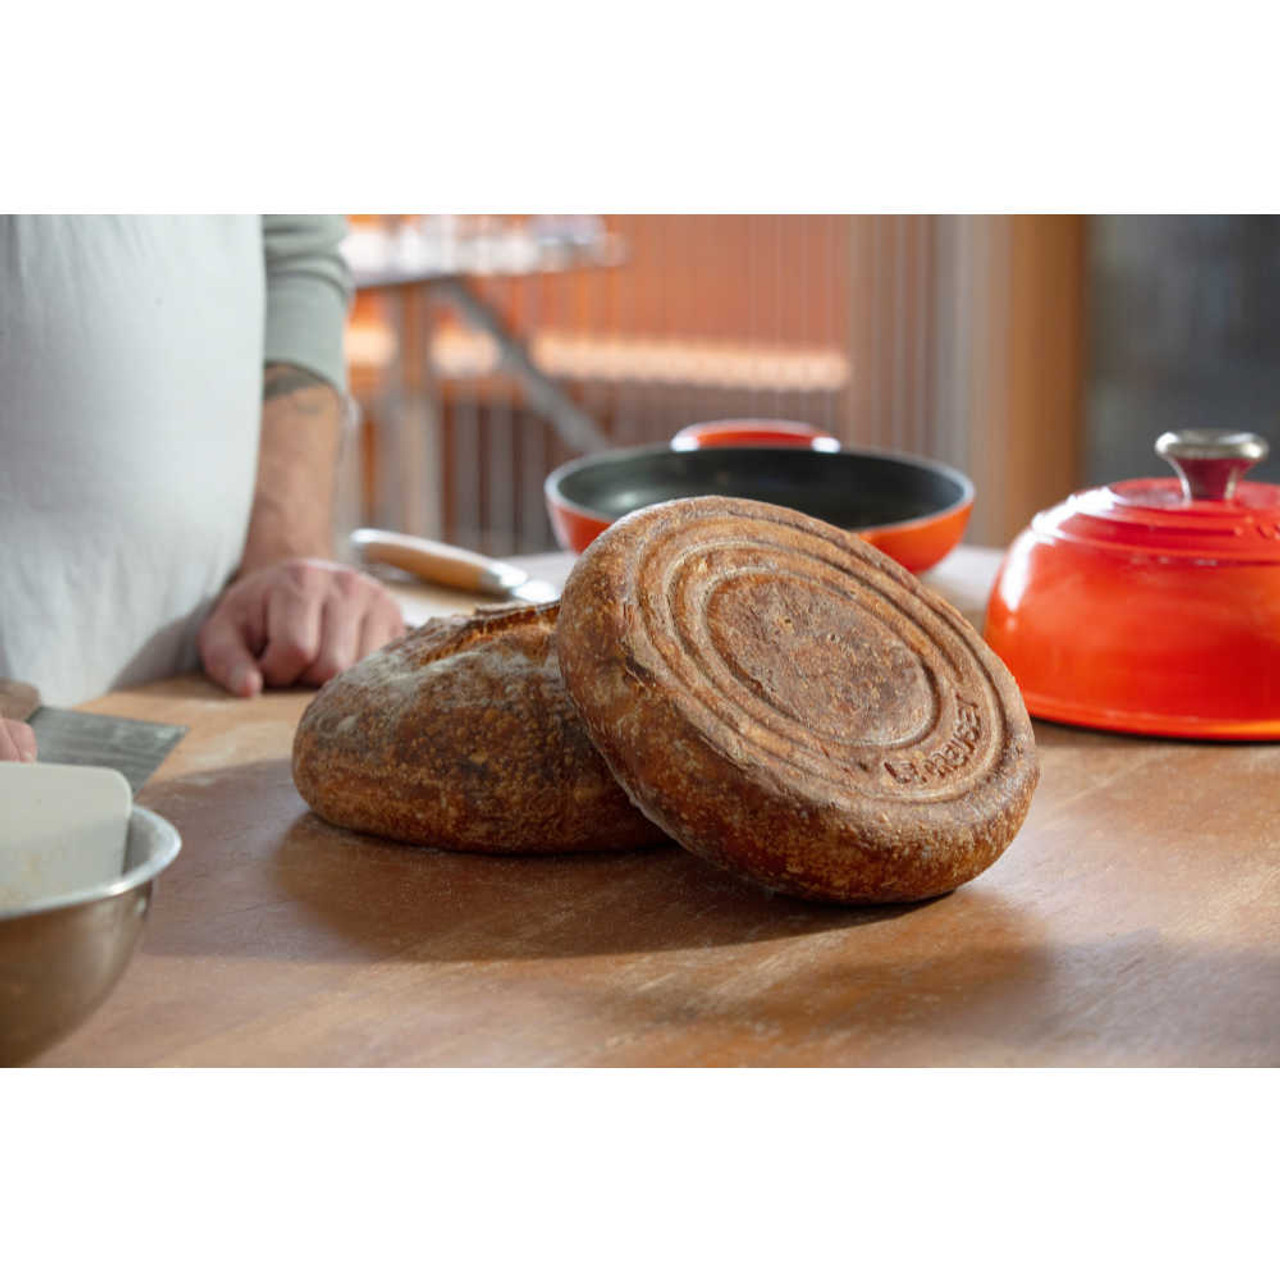 Le Creuset Enameled Cast Iron Bread Oven, Oyster